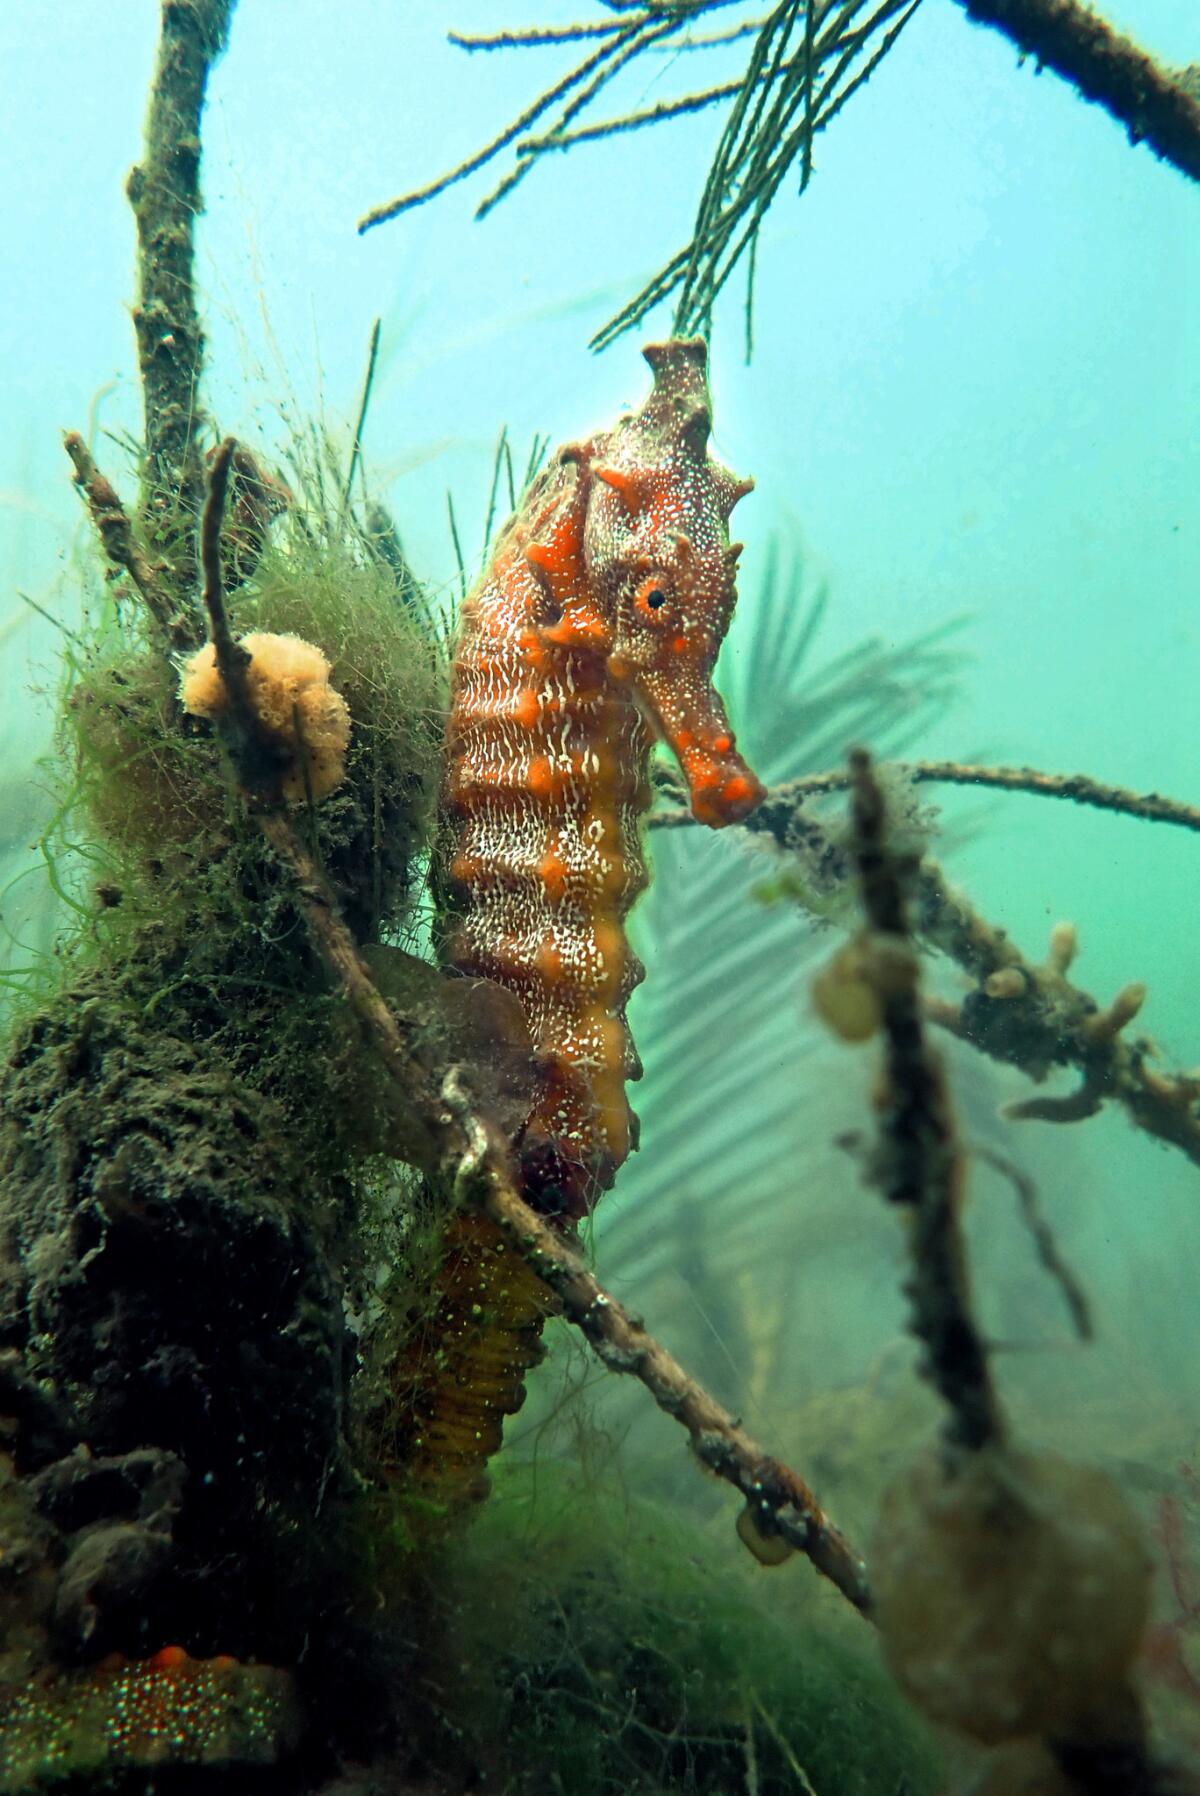 Daphne is one of the seahorses that Rog Hanson is studying in Alamitos Bay. Hanson and Ashley Arnold keep watch over a small colony of Pacific seahorses.